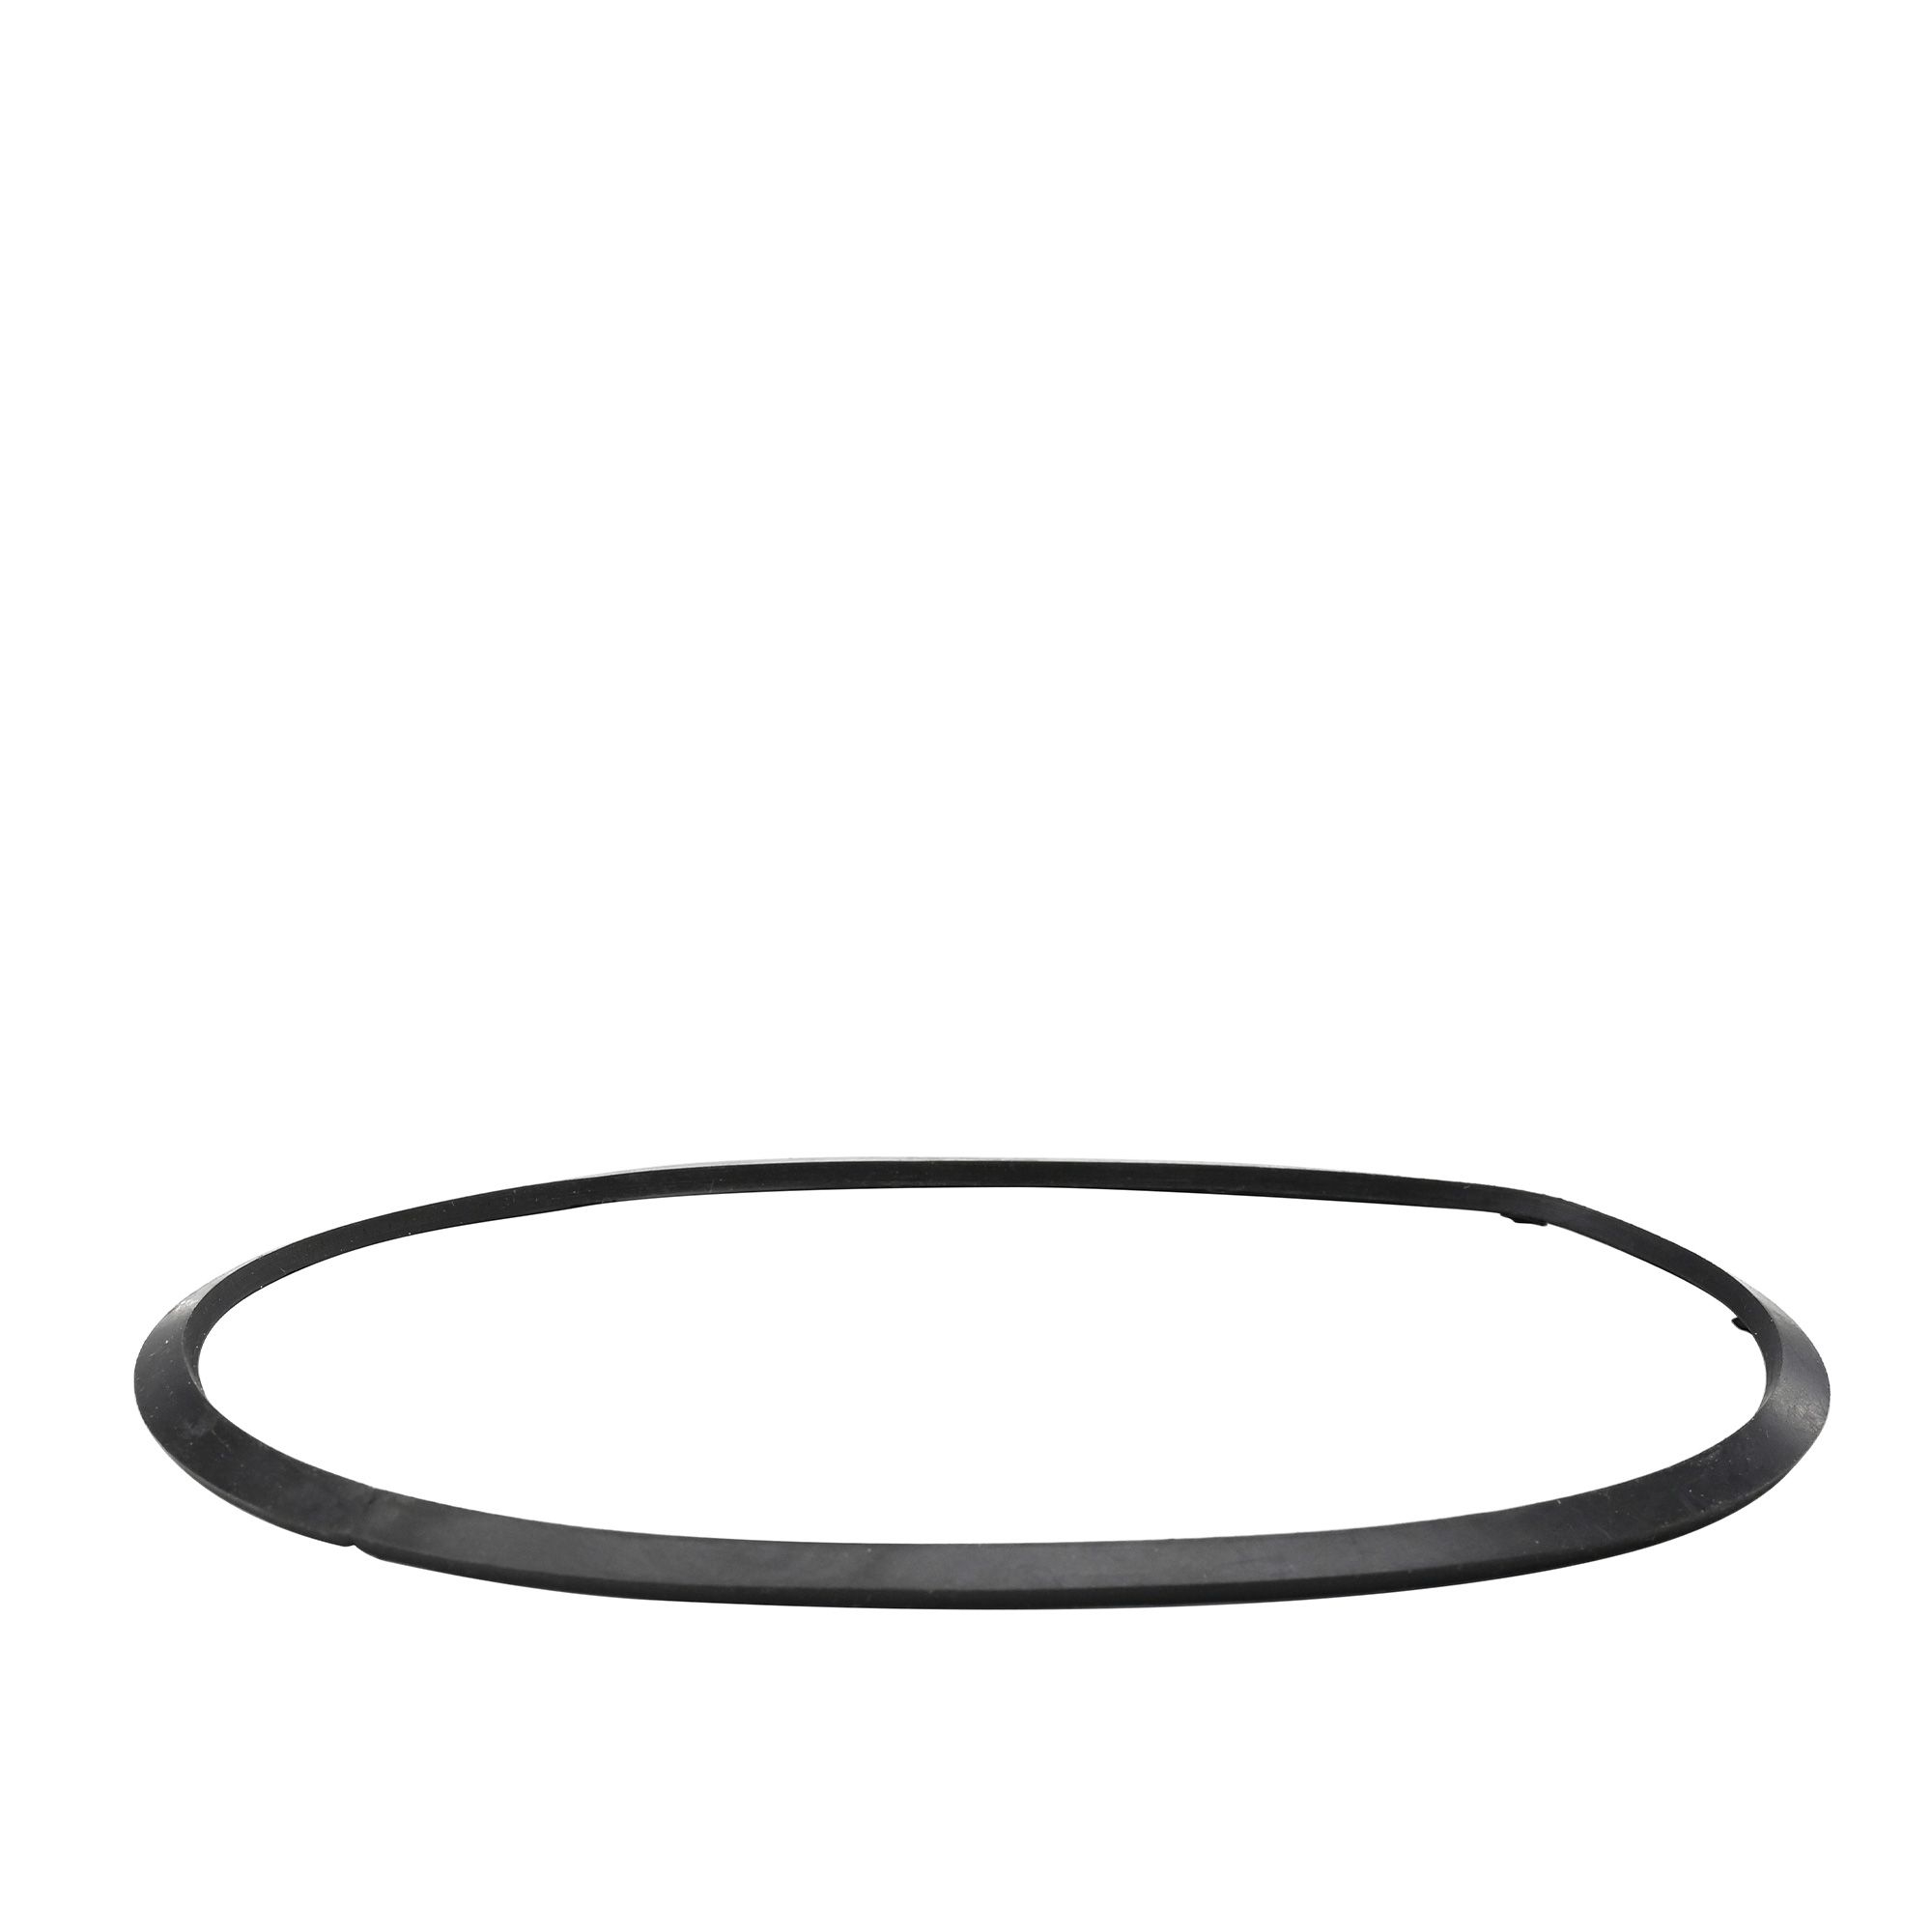 Riess spare parts - rubber ring for seal box oval